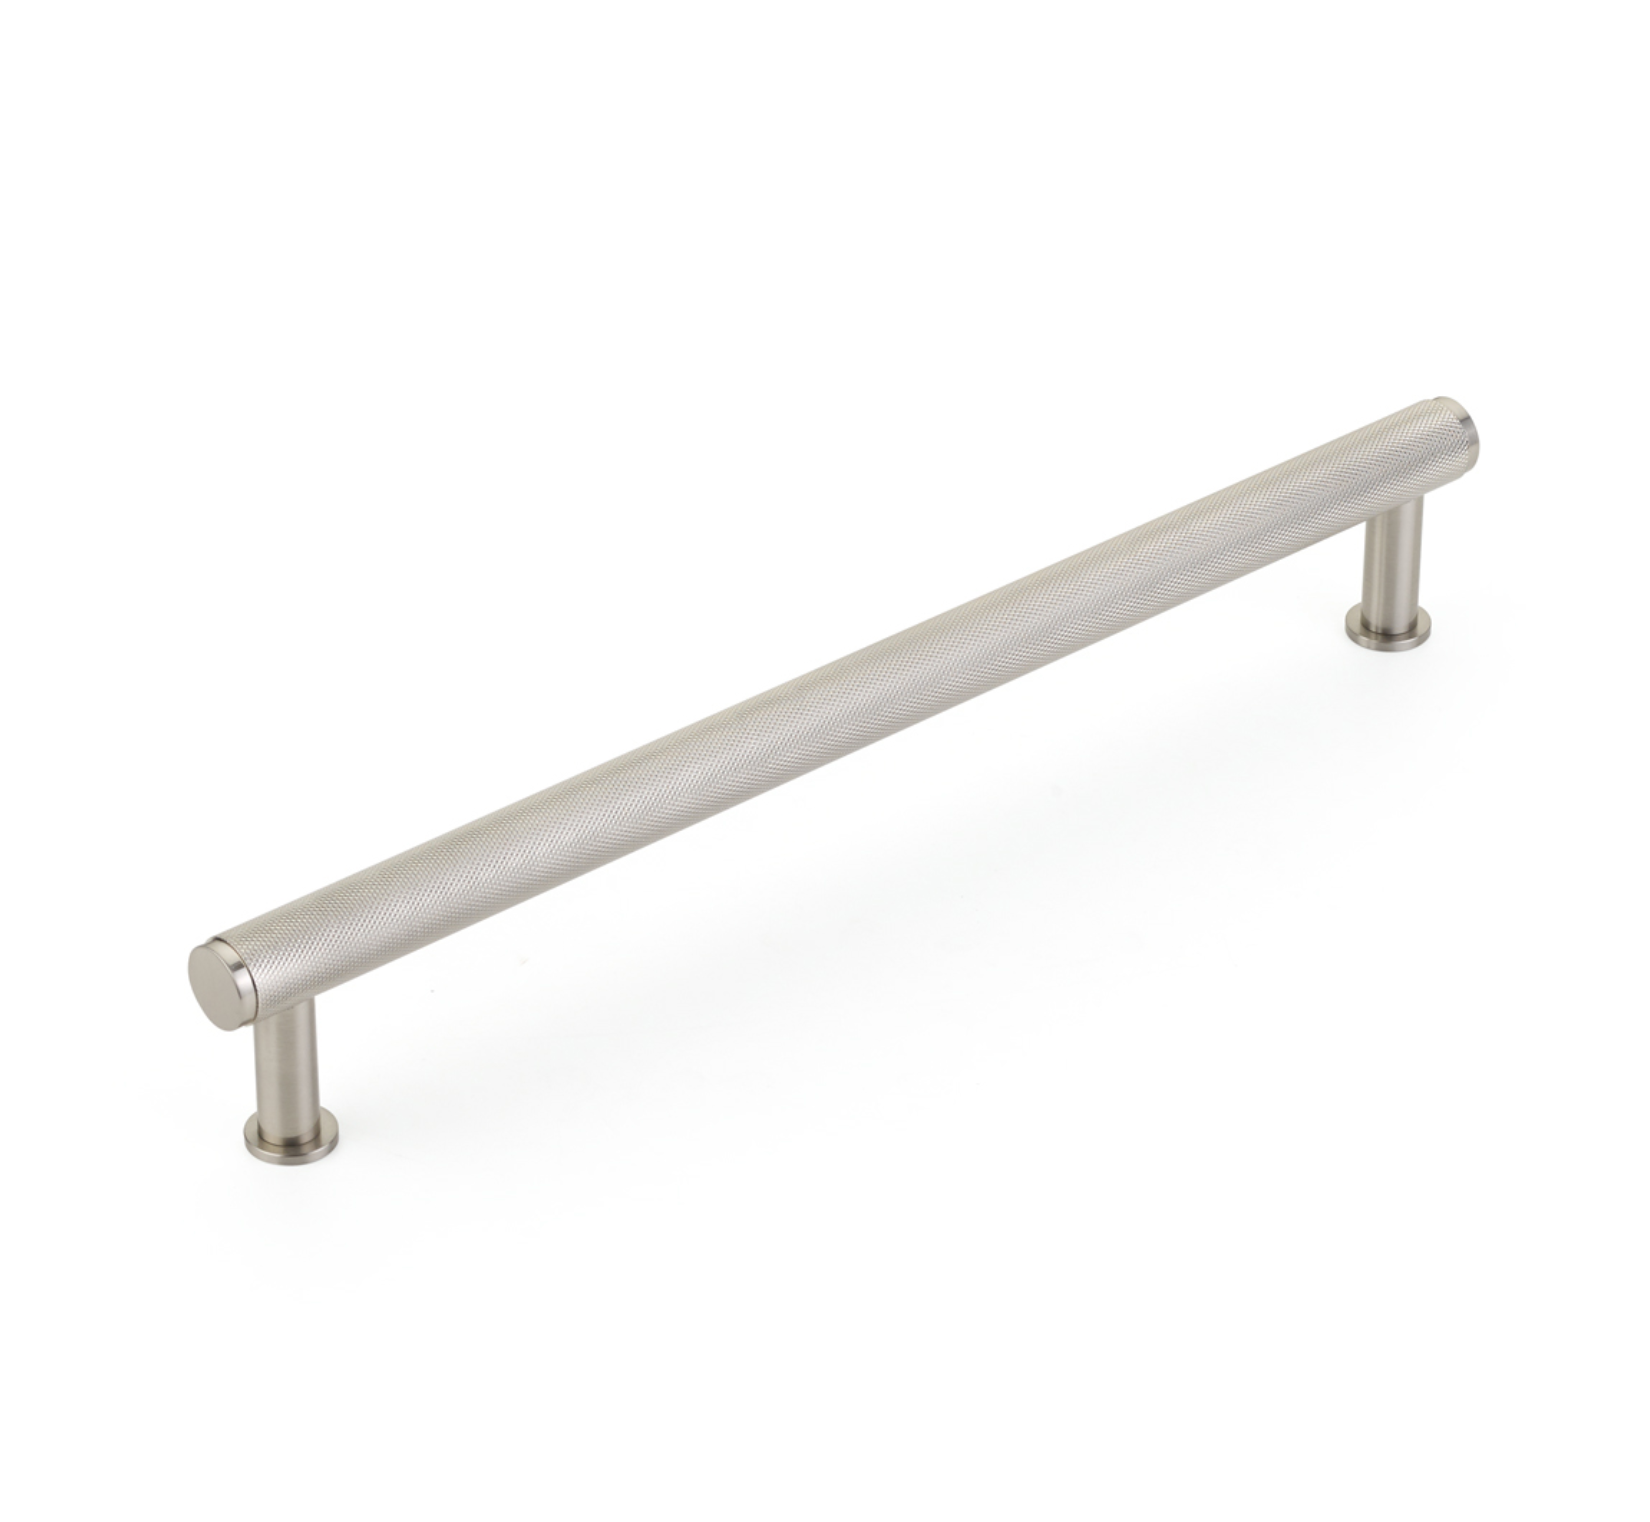 Brushed Nickel "Maison" Knurled Drawer Pulls and Cabinet Knobs with Optional Backplate - Industry Hardware